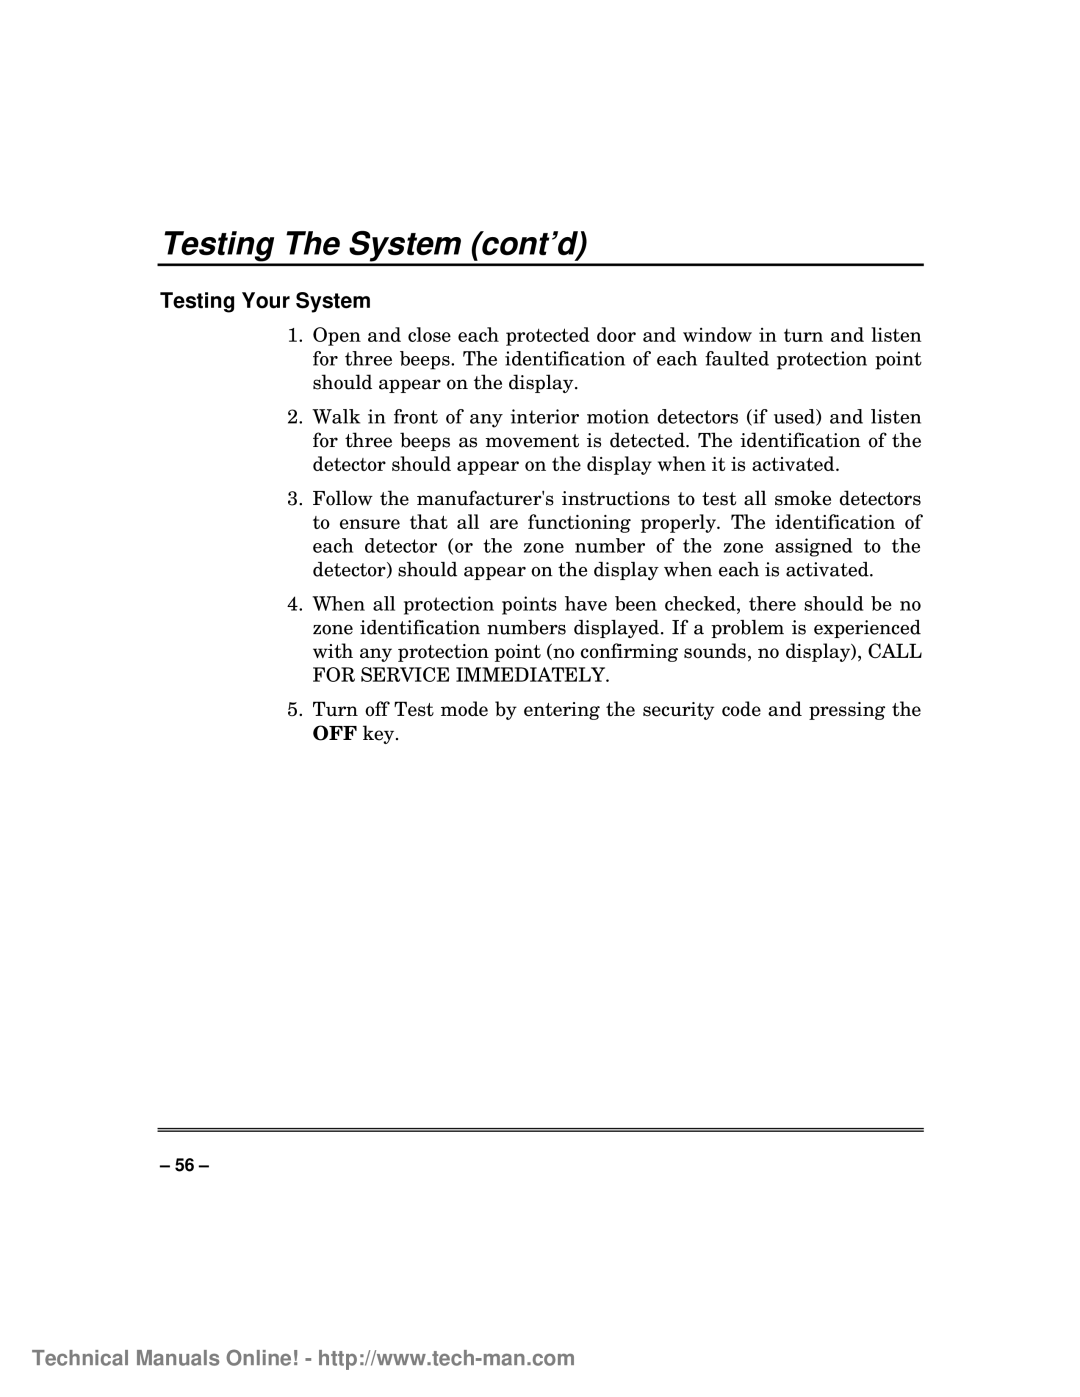 First Alert fa1600c, FA1600C/CA/CB technical manual Testing The System cont’d, Testing Your System 